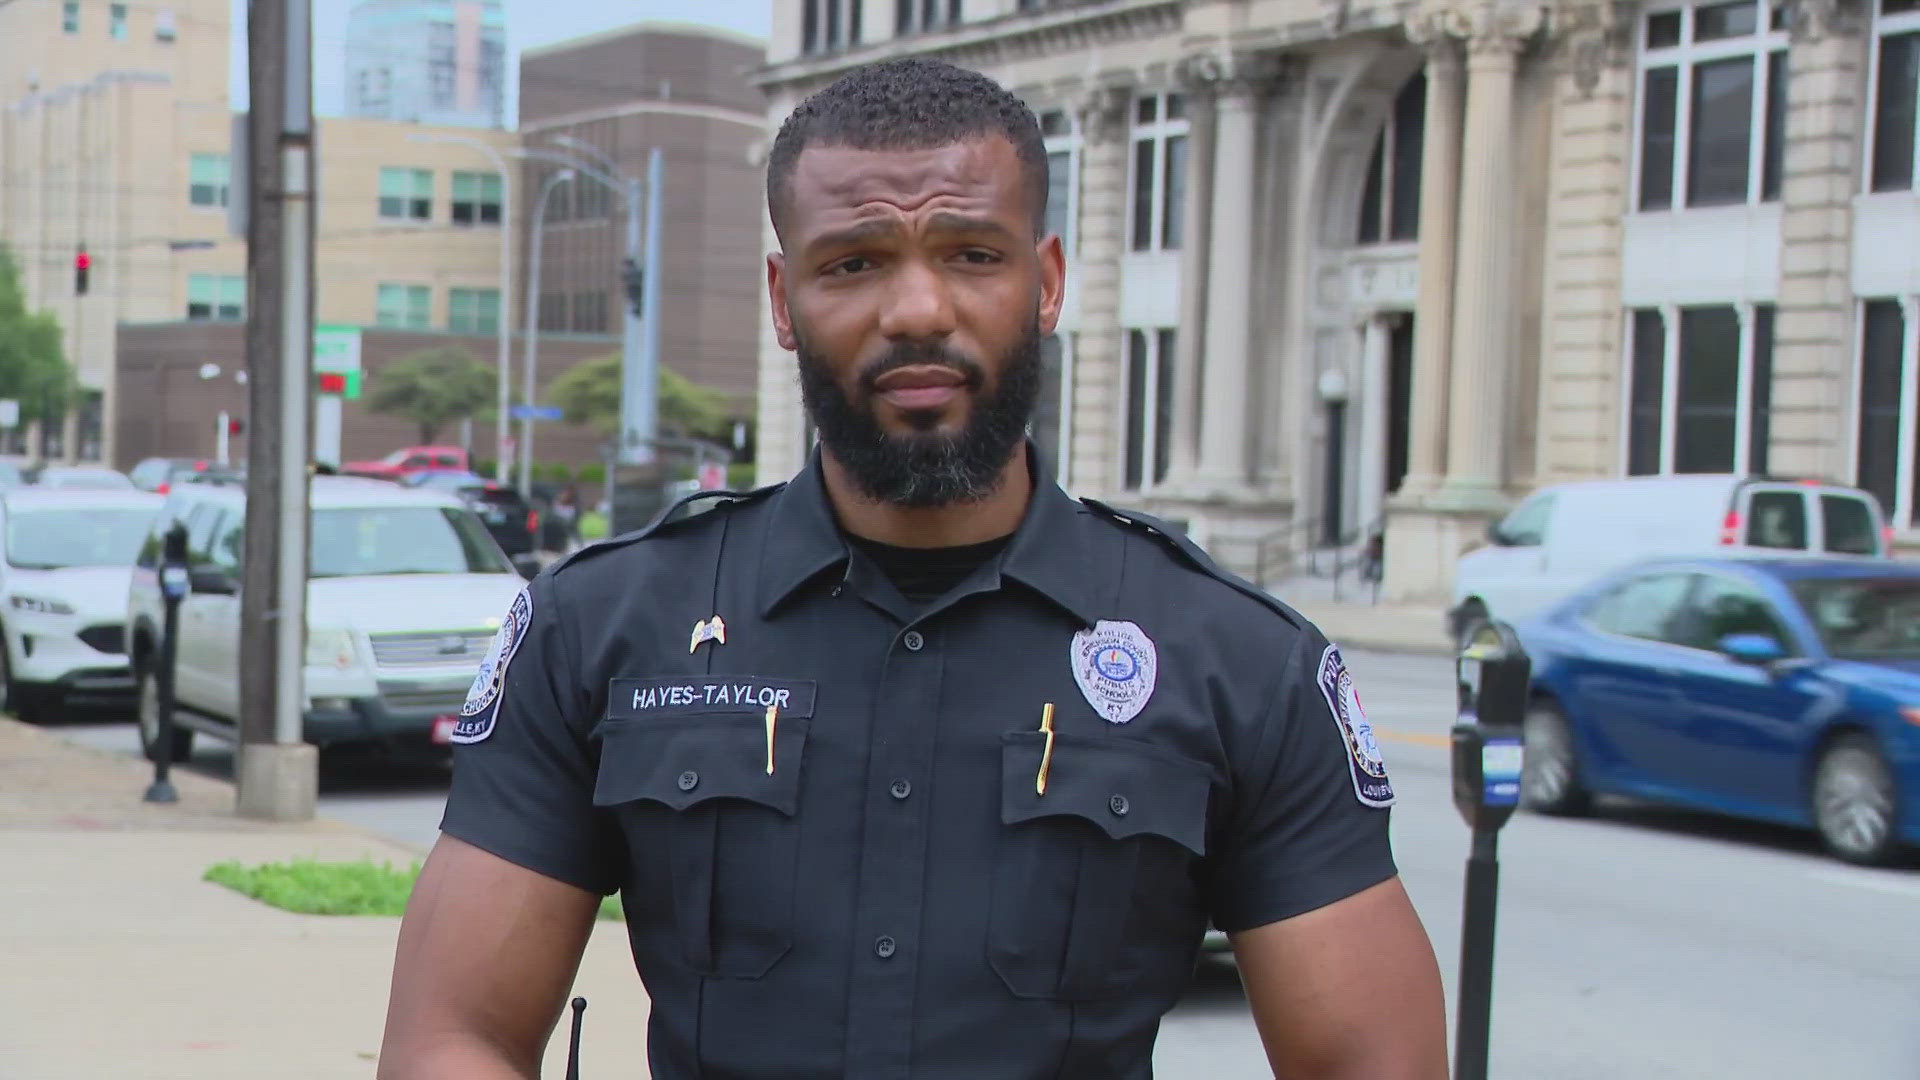 Before LMPD officers were able to get to the scene, Jefferson County Public Schools (JCPS) Officer Kevin Hayes-Taylor drove past the incident and sprung into action.